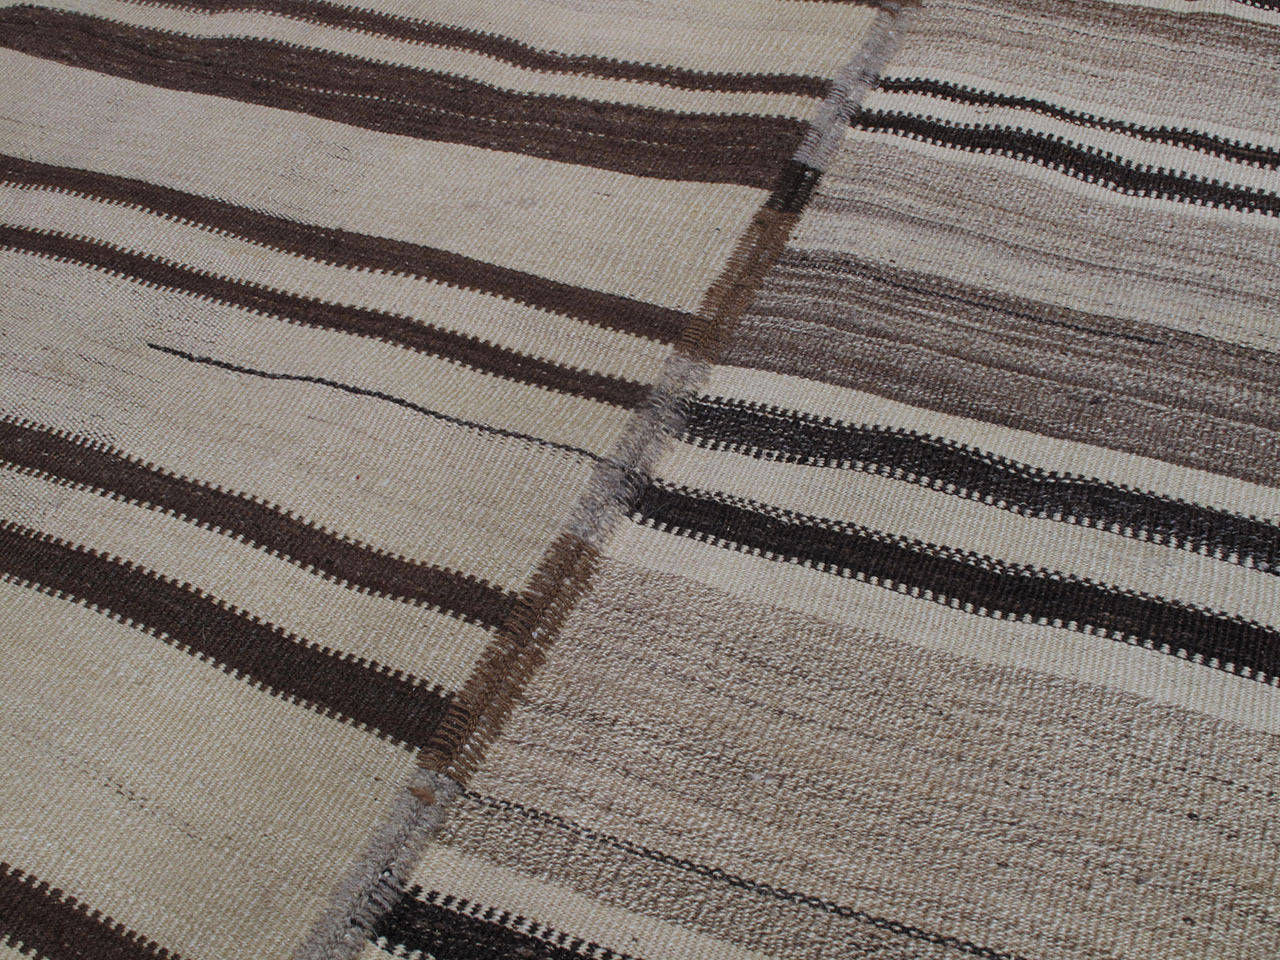 Hand-Woven Striped Kilim in Two Panels